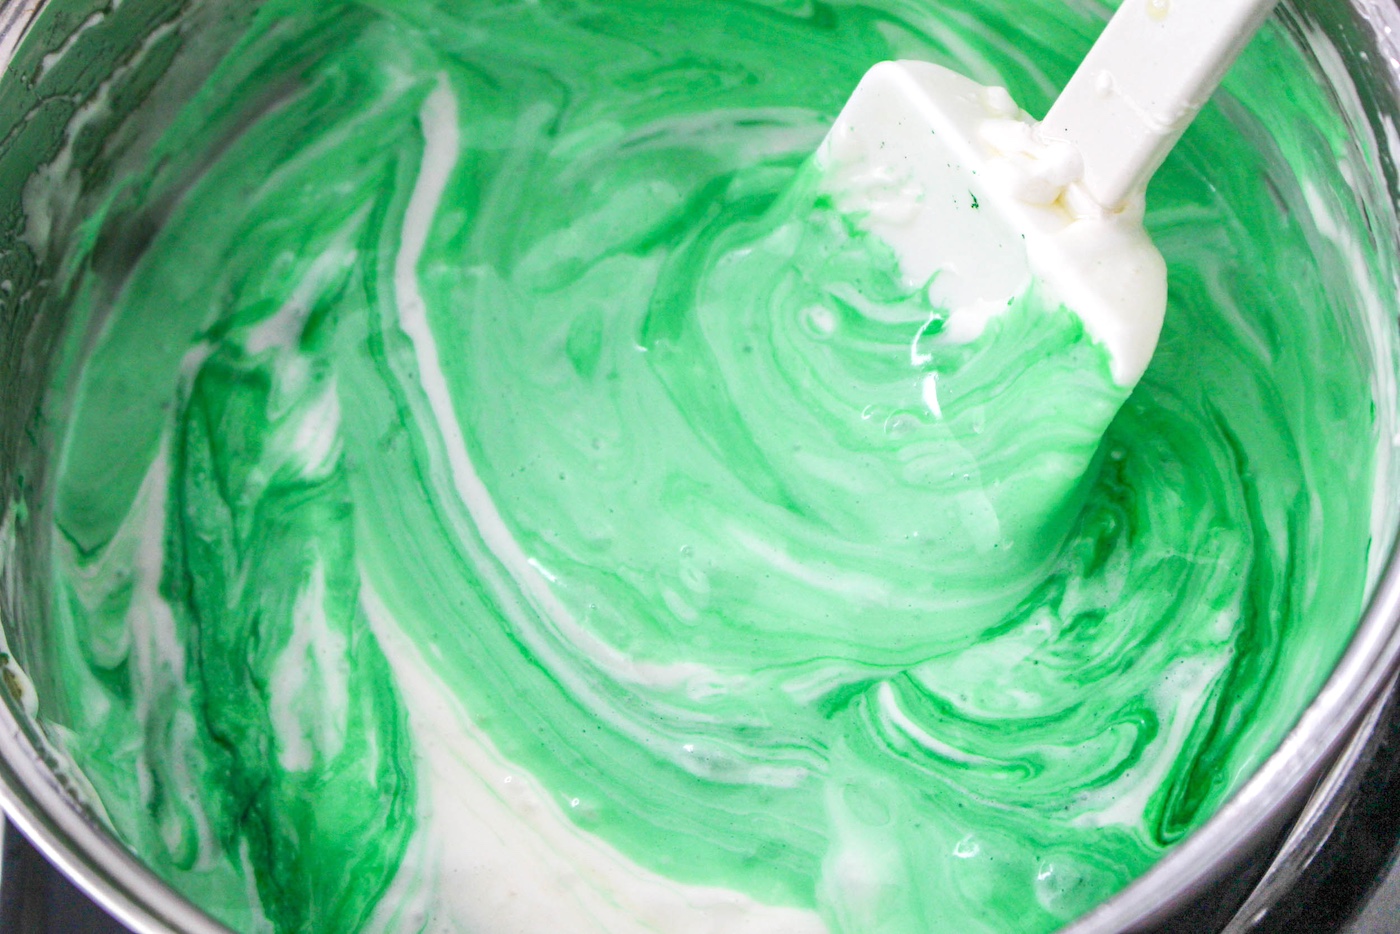 Dying the marshmallows with green food coloring